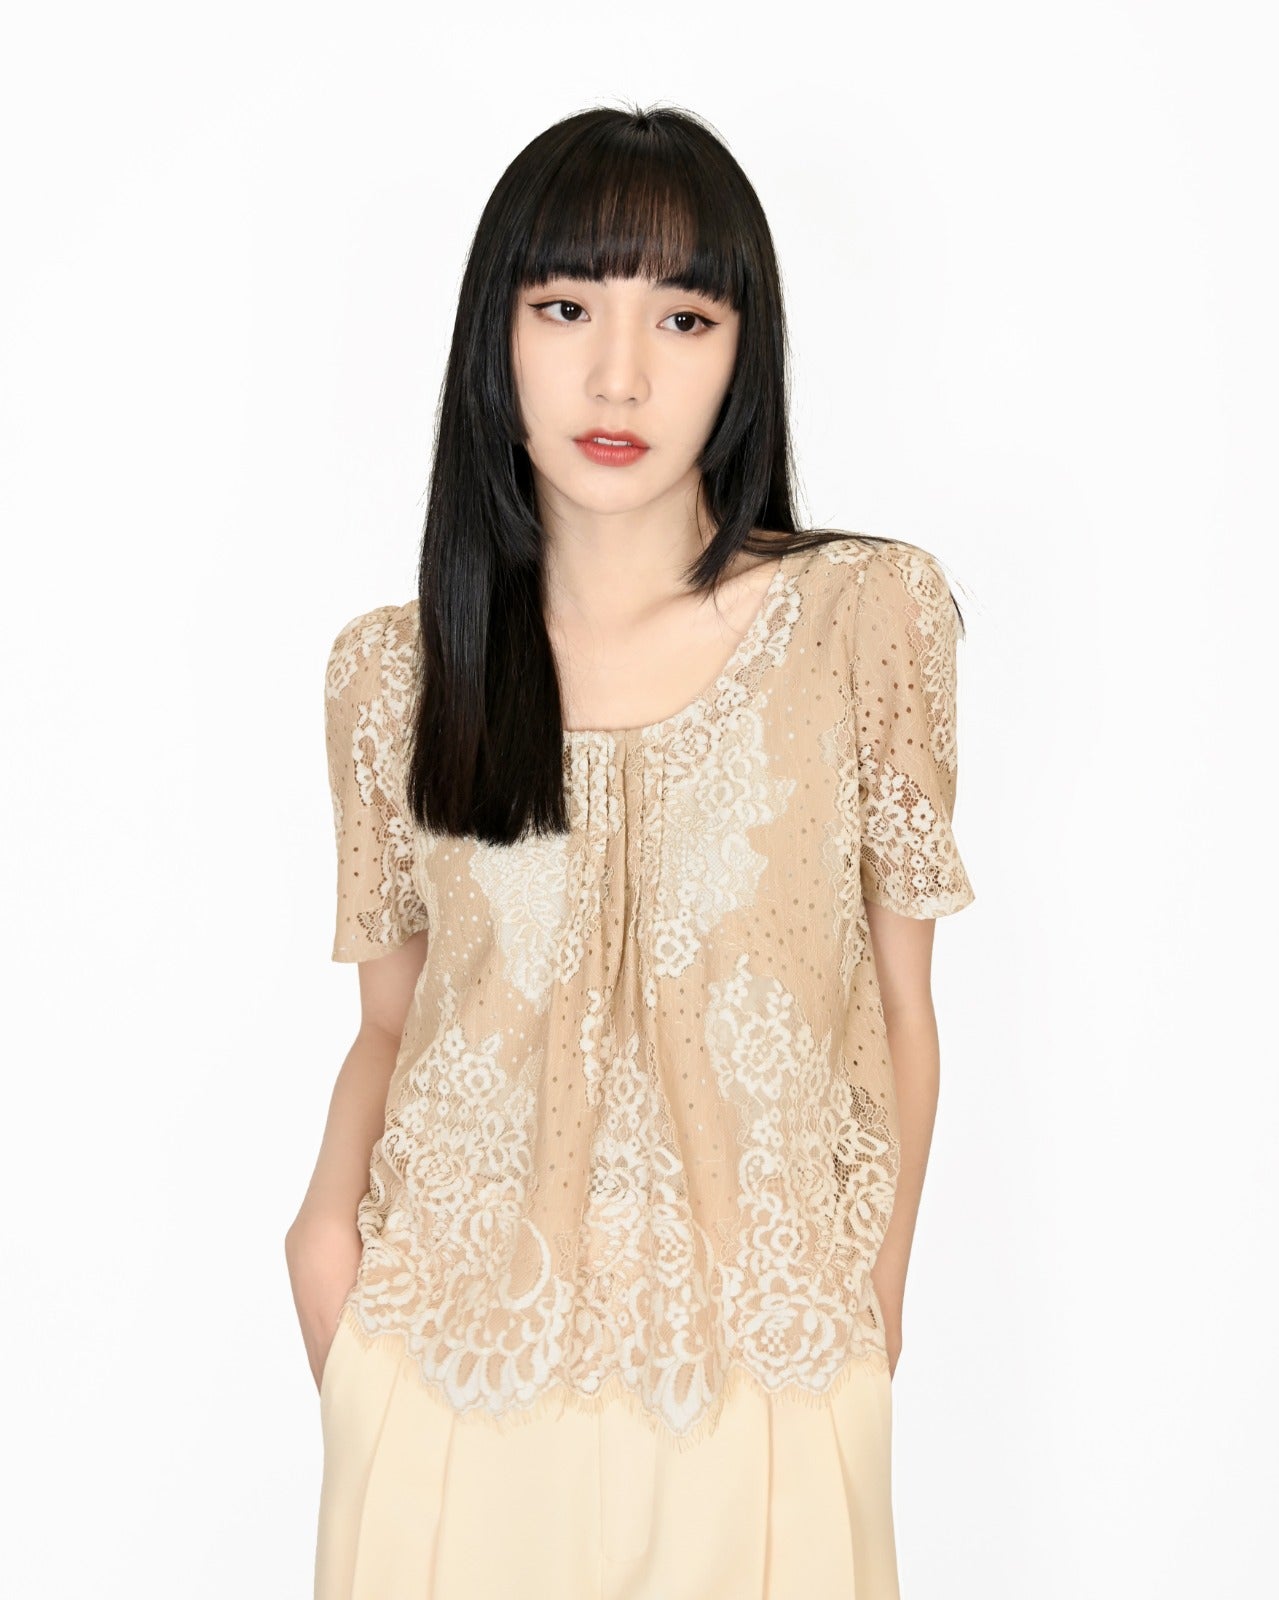 aalis FION pleated lace top (Beige)